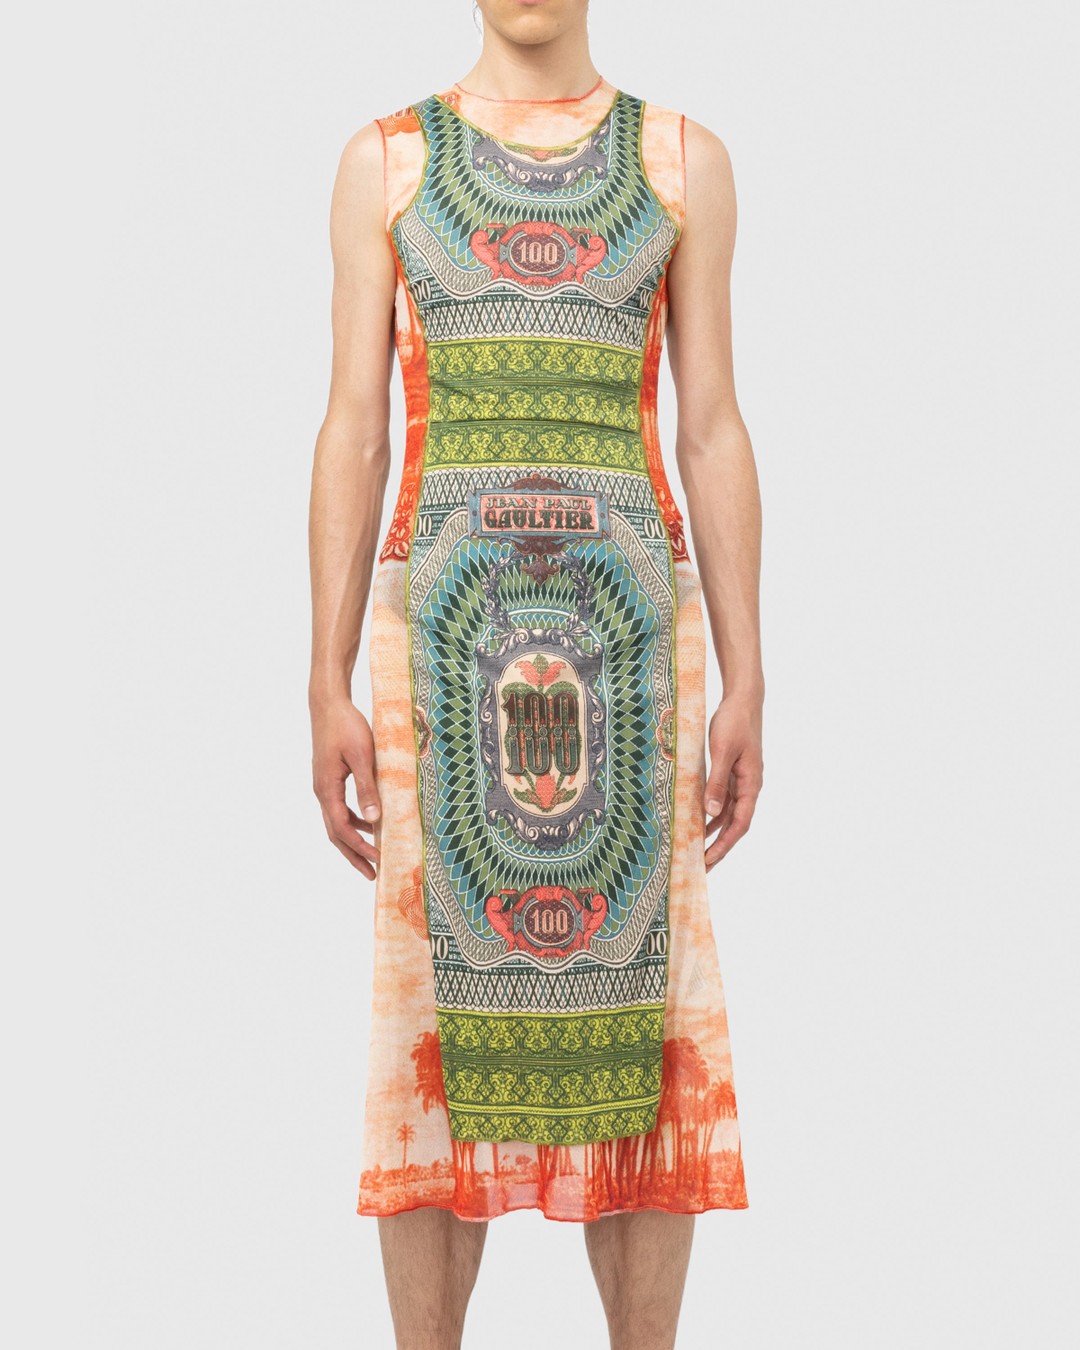 Jean Paul Gaultier – Banknote and Palm Tree Print Dress Multi - Maxi - Green - Image 2